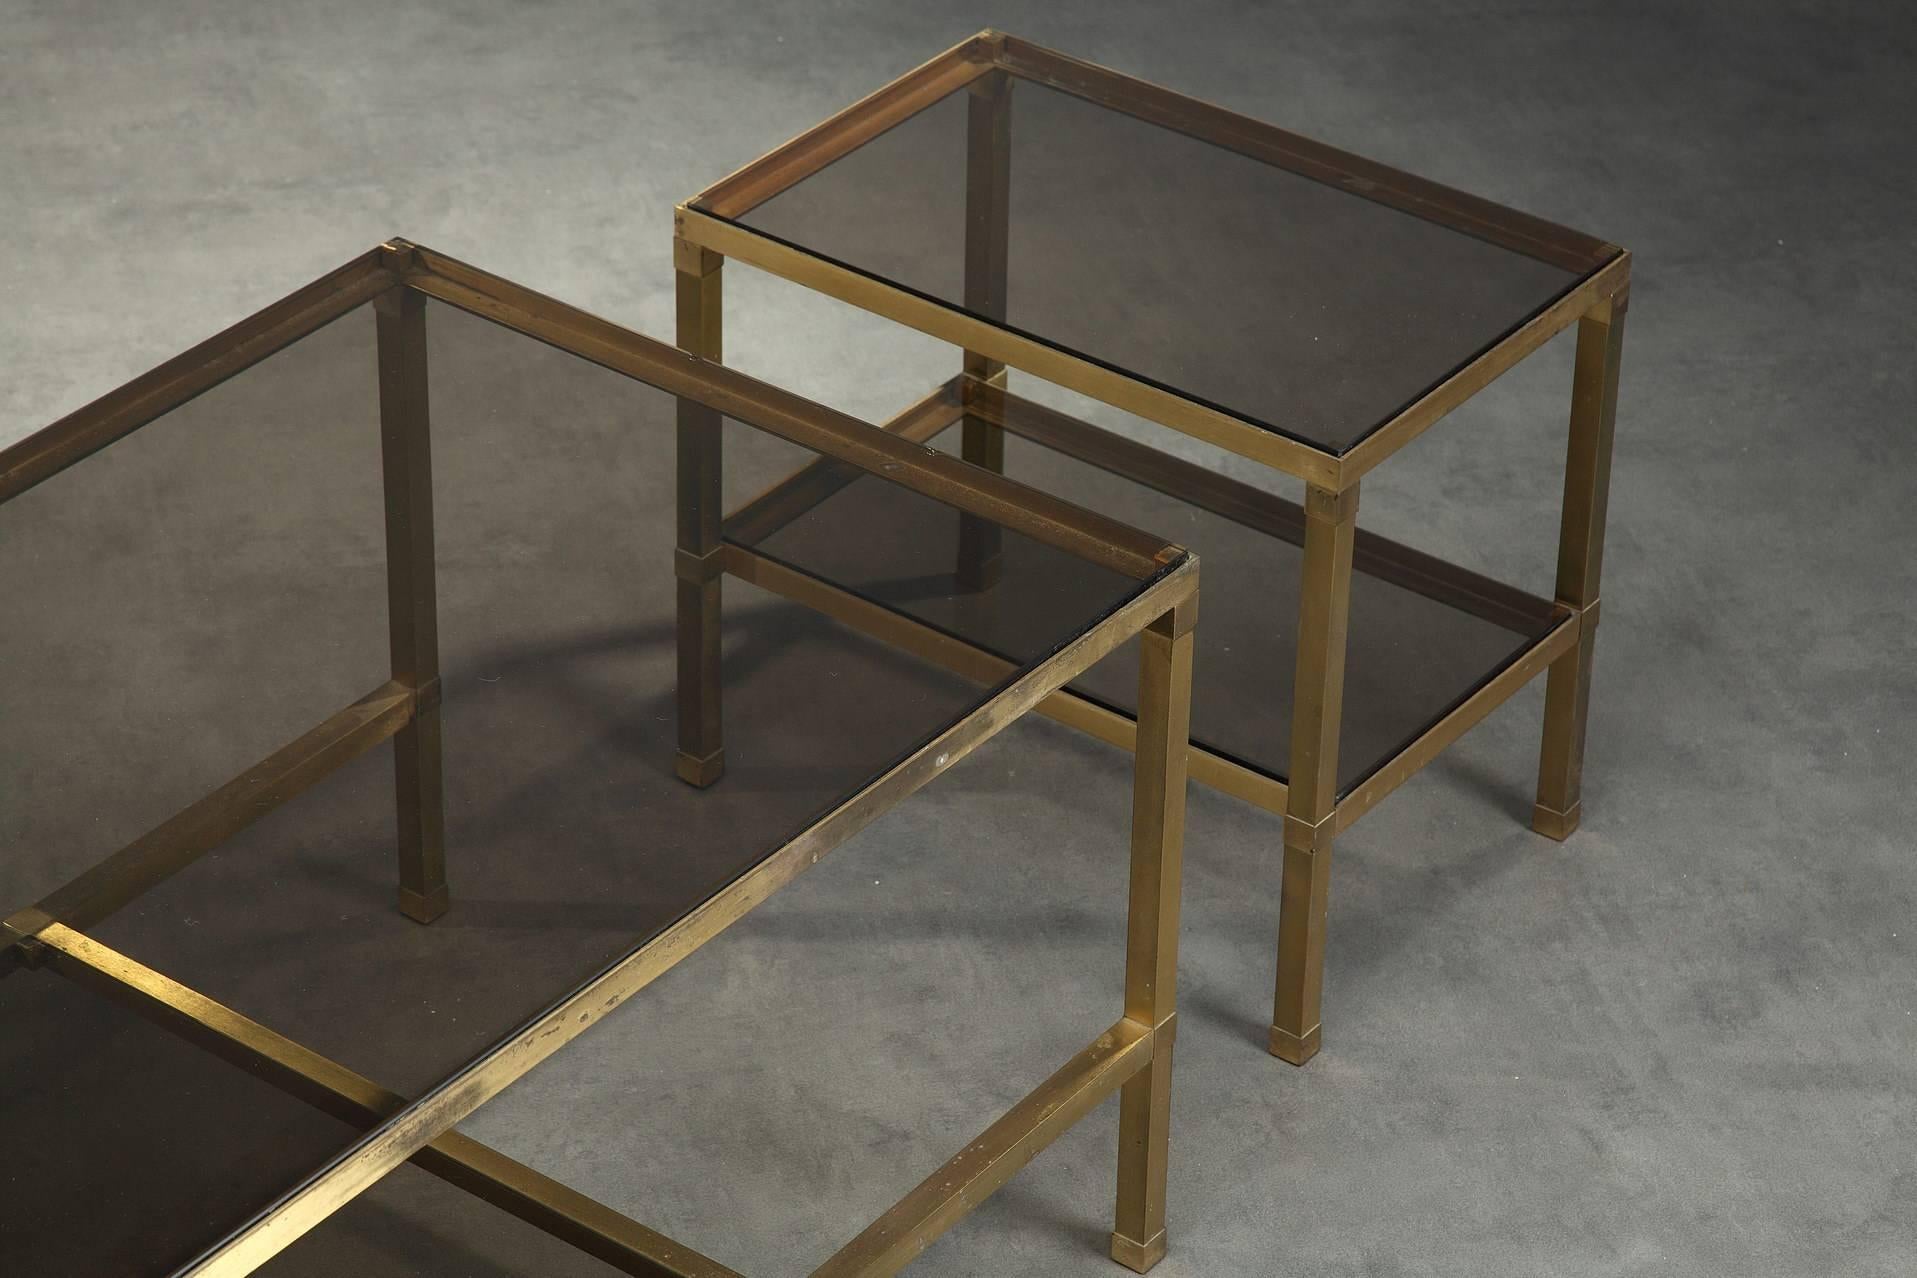 Gilt bronze coffee table composed of three nesting tables. Each table is provided with two smoked glass trays. Attributed to Maison Jansen (Paris, 1880-1989). Good vintage condition, with some oxidation on the metal, circa 1970.
Measures: Big table